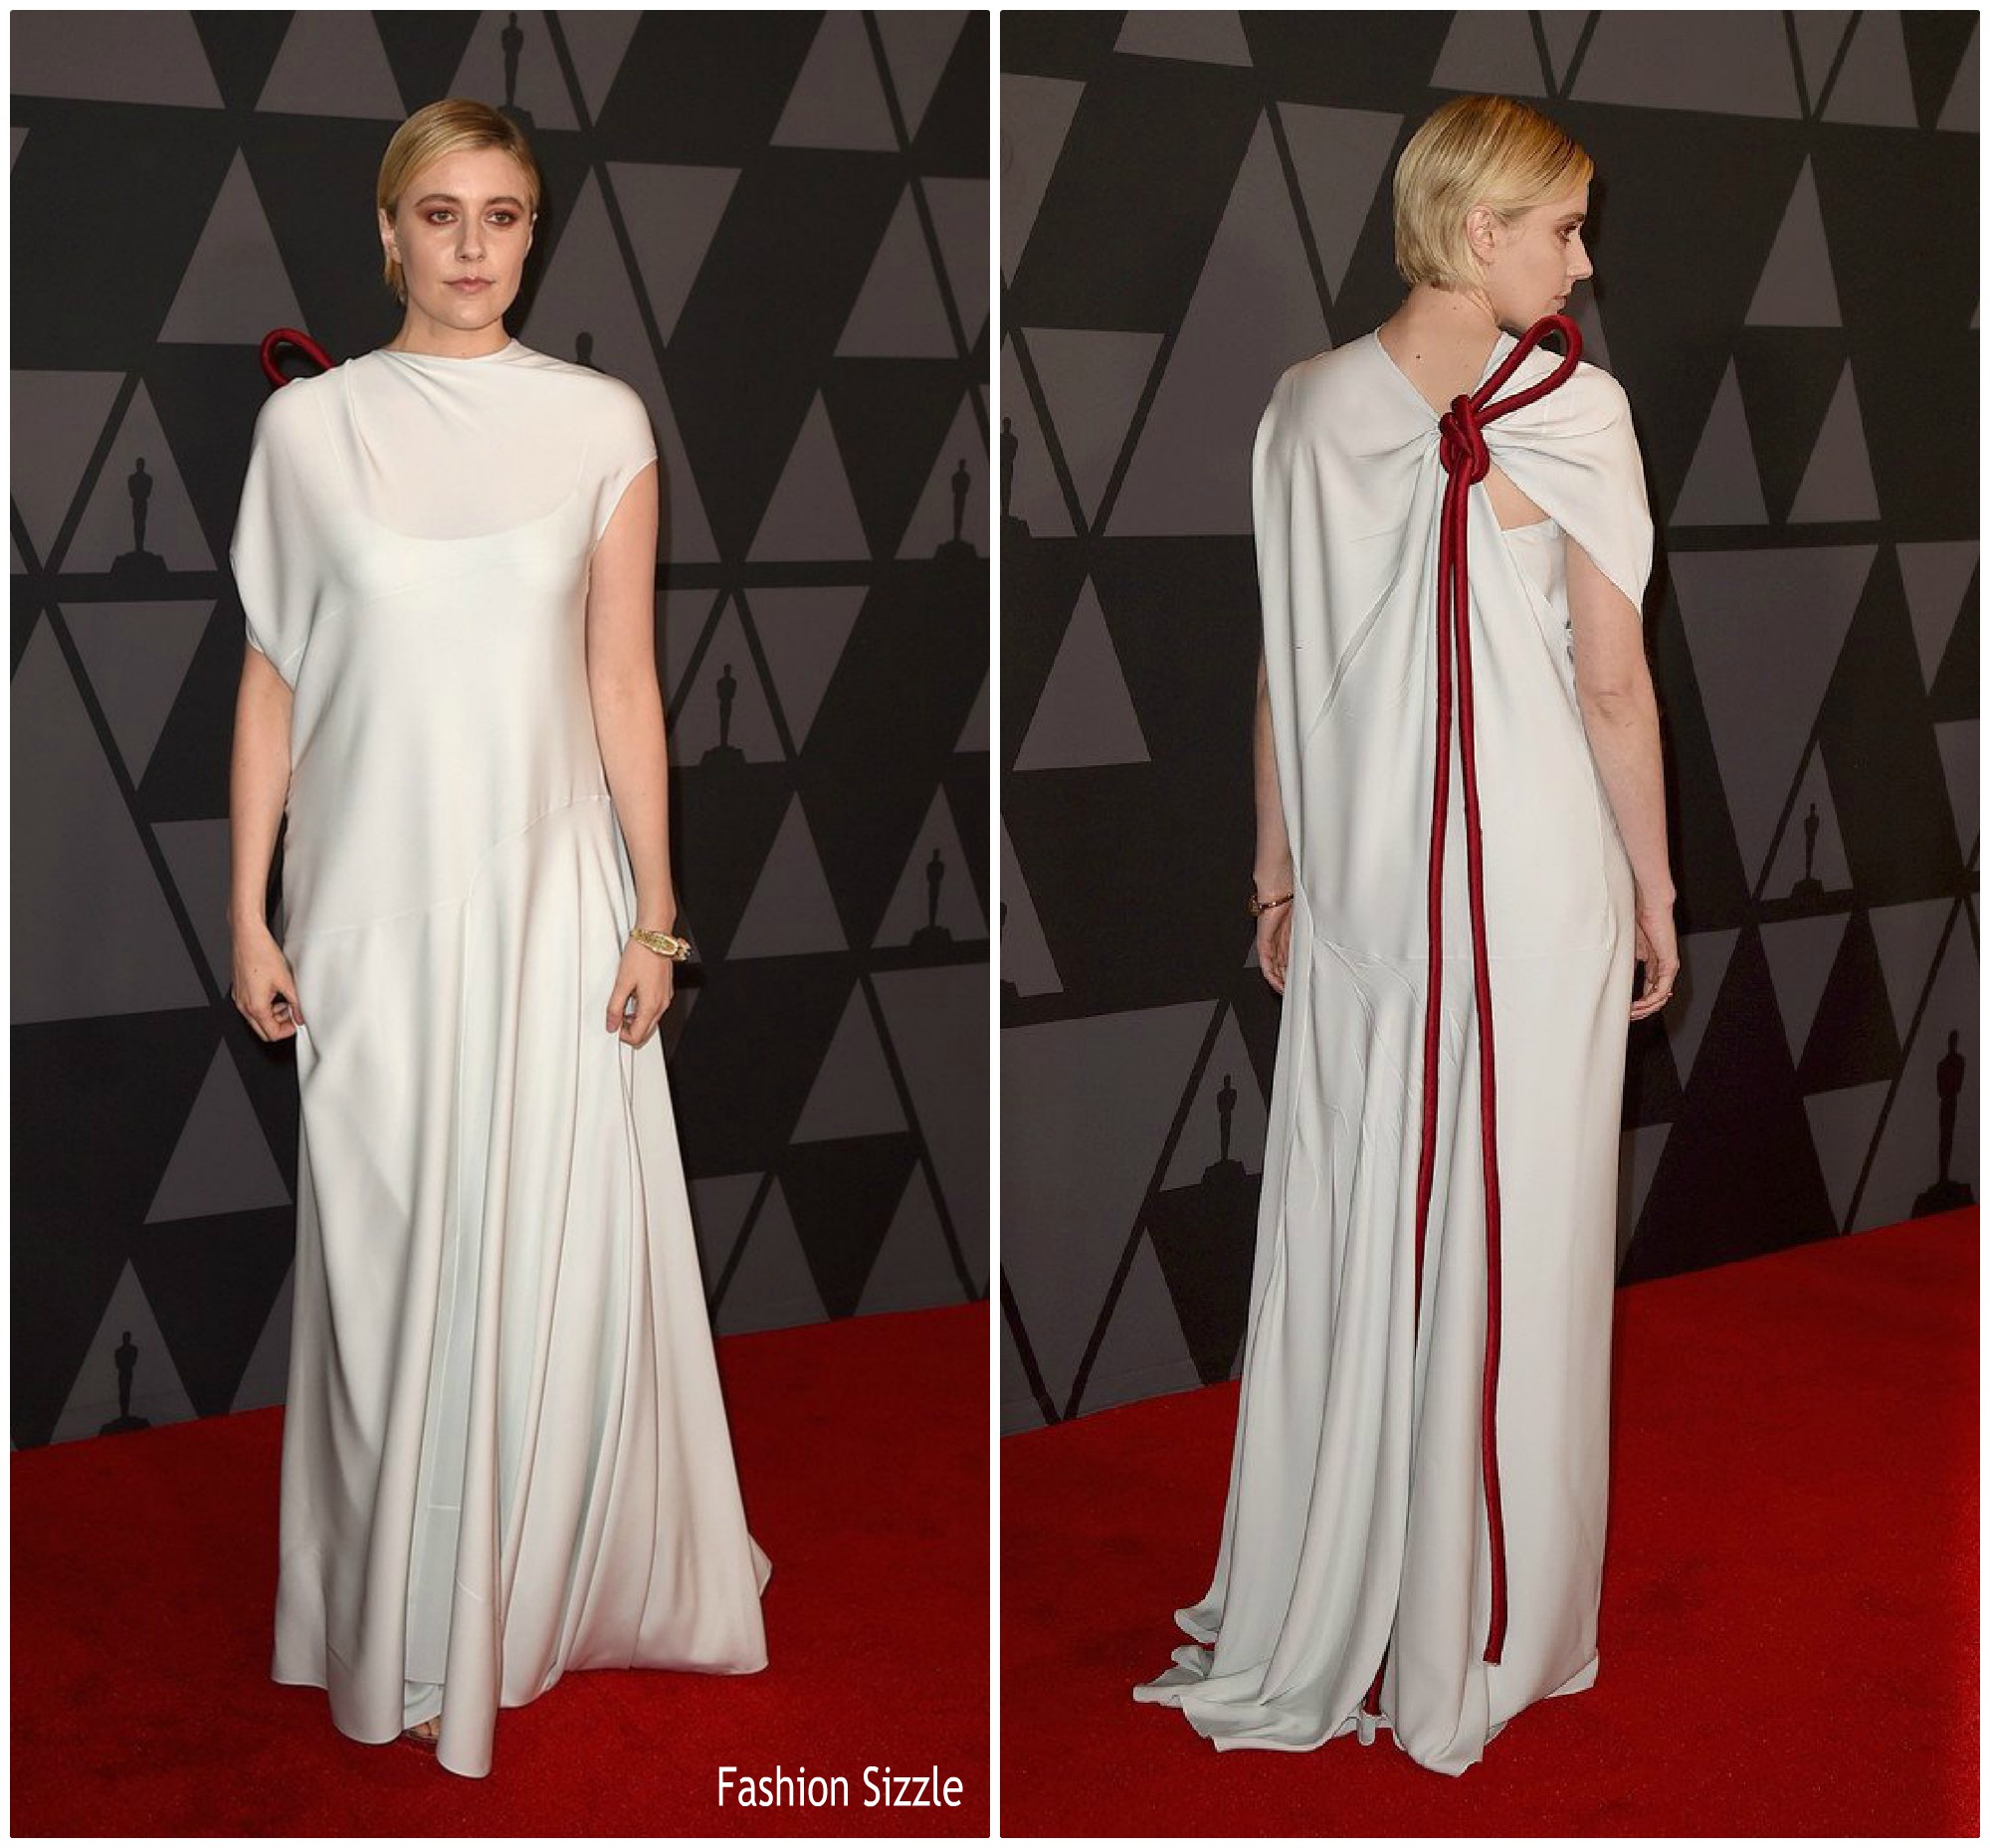 greta-gerwig-in-the-row-9th-annual-governors-awards